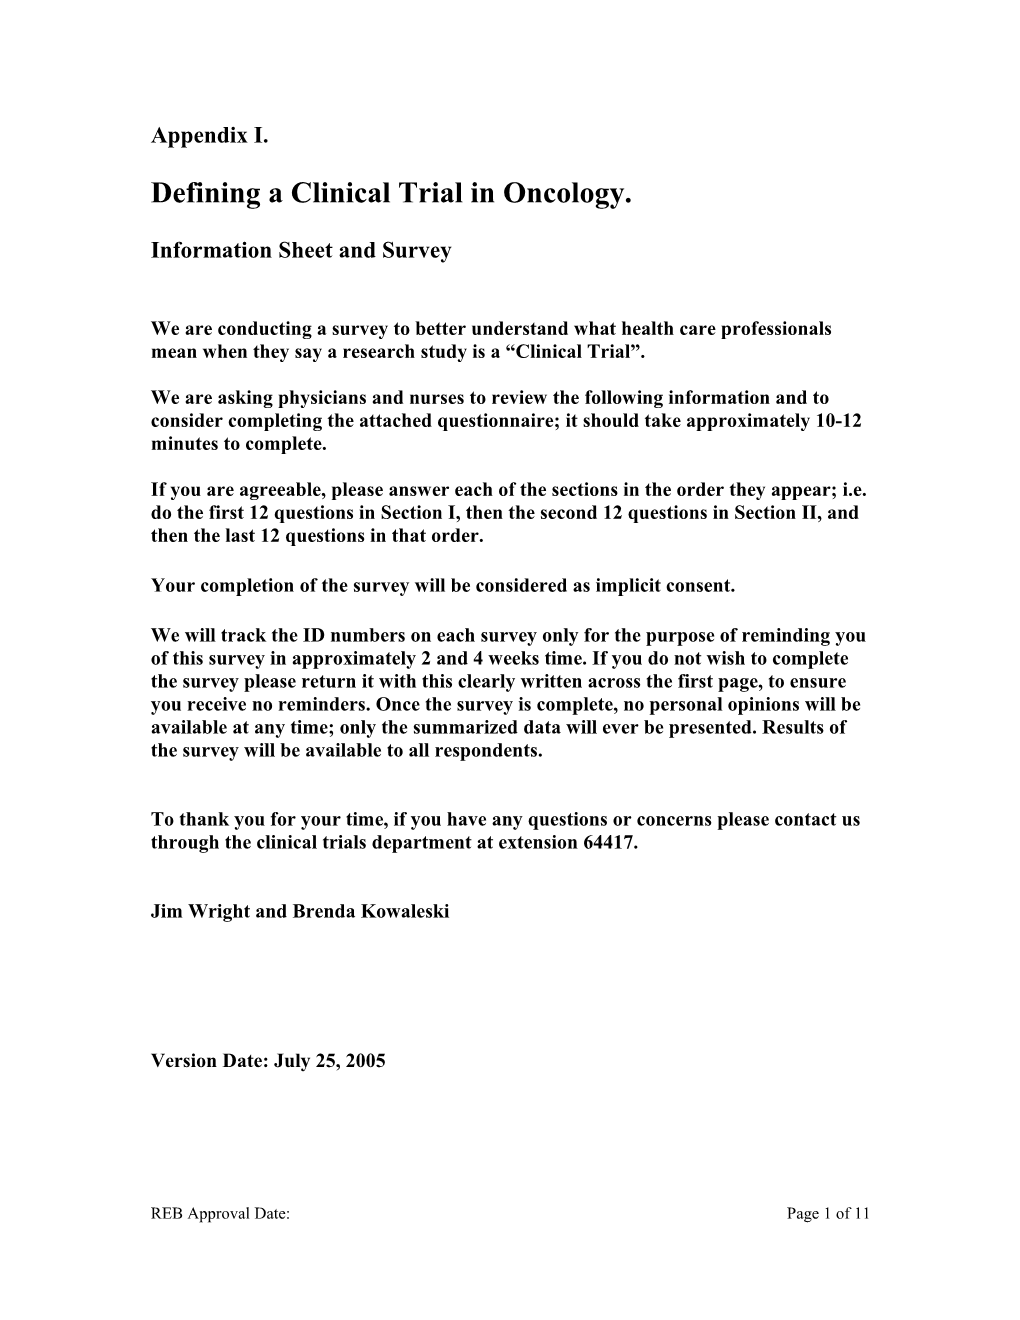 Defining a Clinical Trial in Oncology